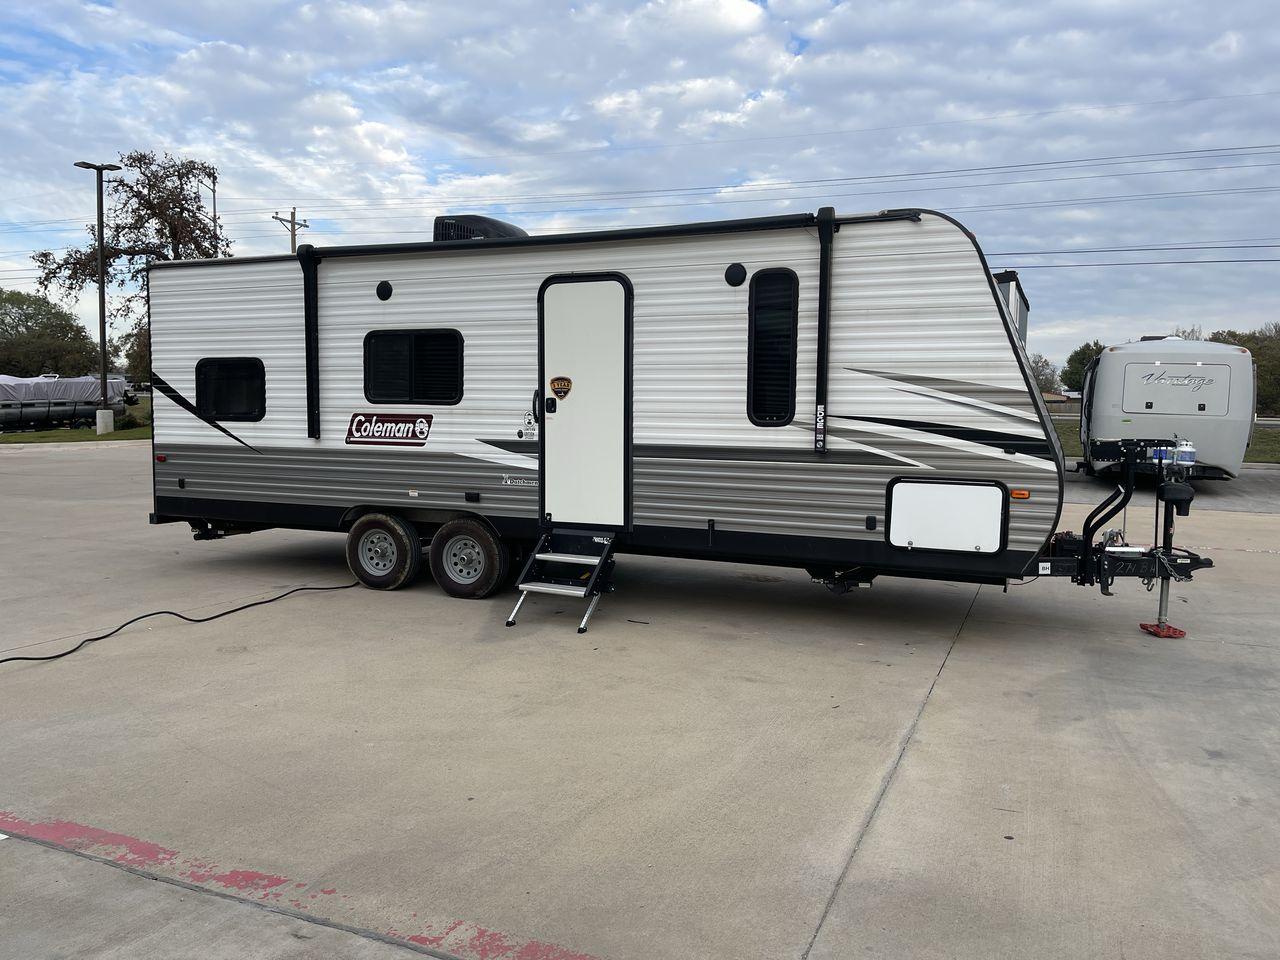 2021 WHITE KEYSTONE COLEMAN 274BH (4YDT27429MH) , Length: 28.58 ft. | Dry Weight: 4,789 lbs. | Slides: 0 transmission, located at 4319 N Main Street, Cleburne, TX, 76033, (817) 221-0660, 32.435829, -97.384178 - Set out on an adventure-filled, comfortable journey in the 2021 Keystone Coleman 274BH travel trailer. Families looking for a fun and memorable camping trip will love this well-designed and adaptable travel companion. The dimensions of this unit are 28.58 ft in length, 8 ft in width, and 10.33 ft - Photo #22